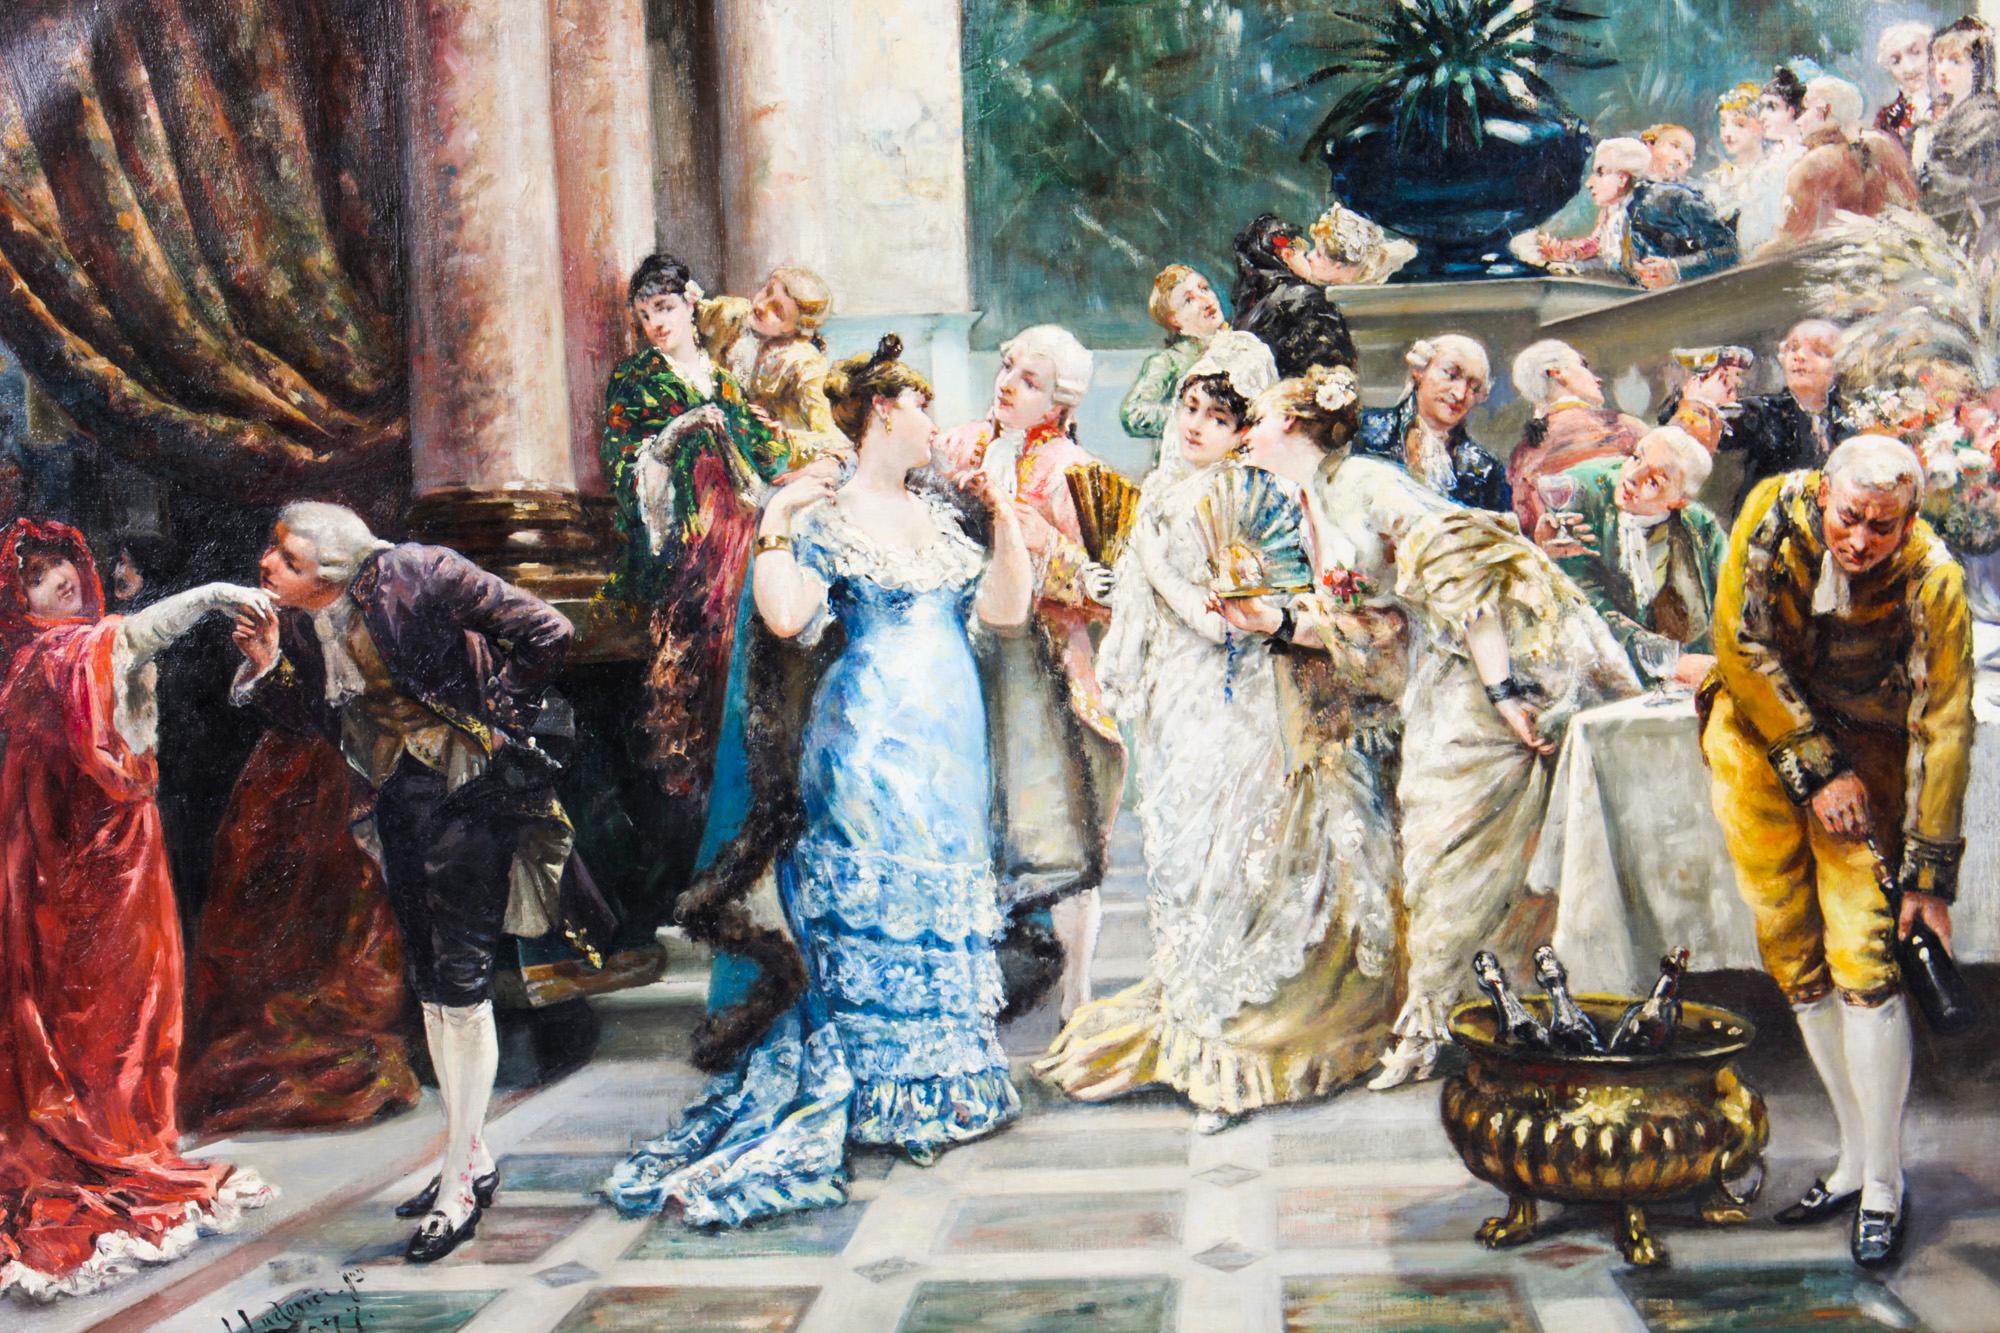 This is a beautiful oil painting by Albert Ludovici Jnr (1852-1932) 'The Get Together', signed and dated 1877.

The painting features very elegantly dressed ladies and gentlemen in a large period ballroom enjoying a soiree.

The painting is